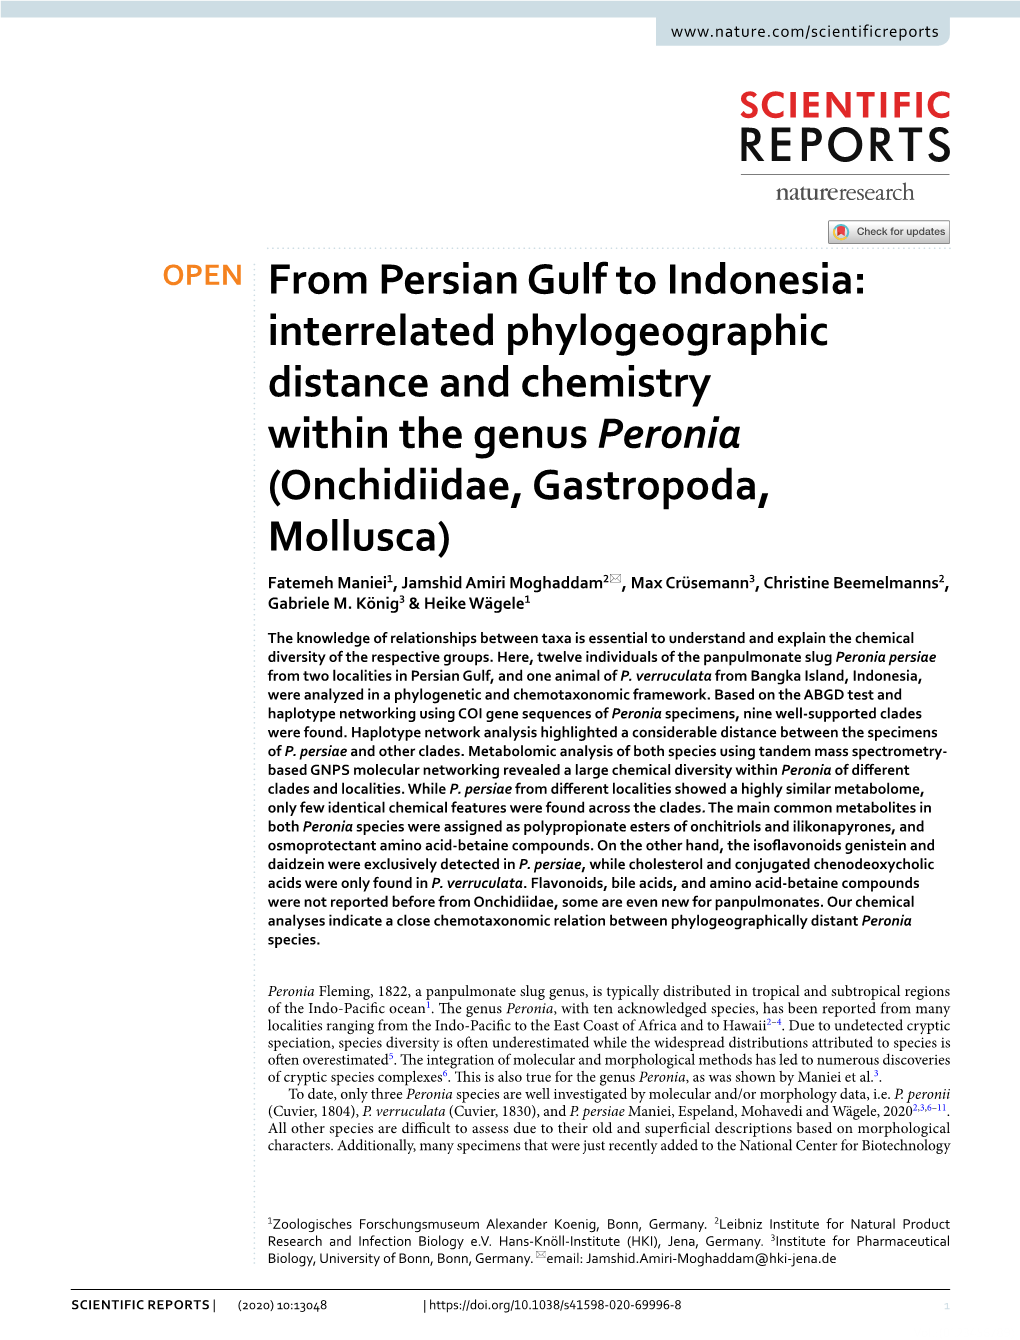 From Persian Gulf to Indonesia: Interrelated Phylogeographic